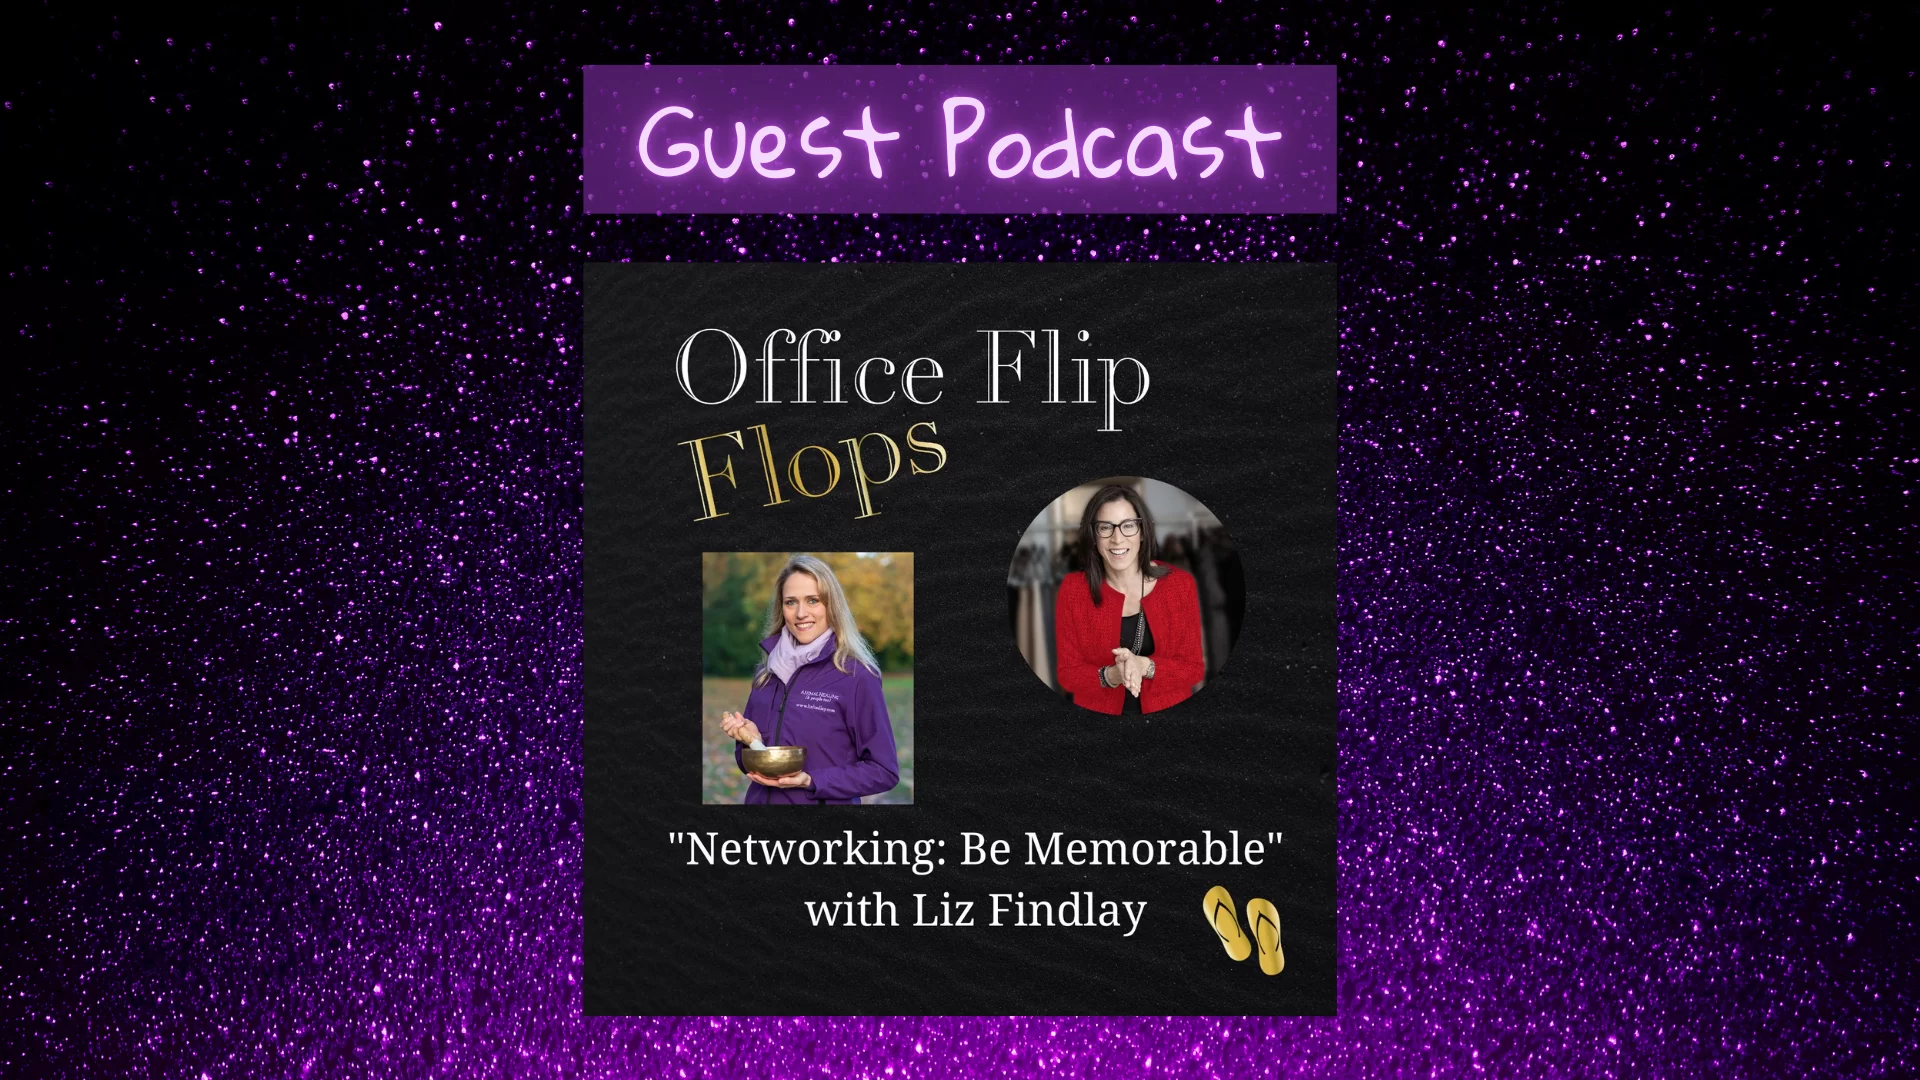 Networking: Be Memorable with Liz Findlay and Francesca Zampaglione